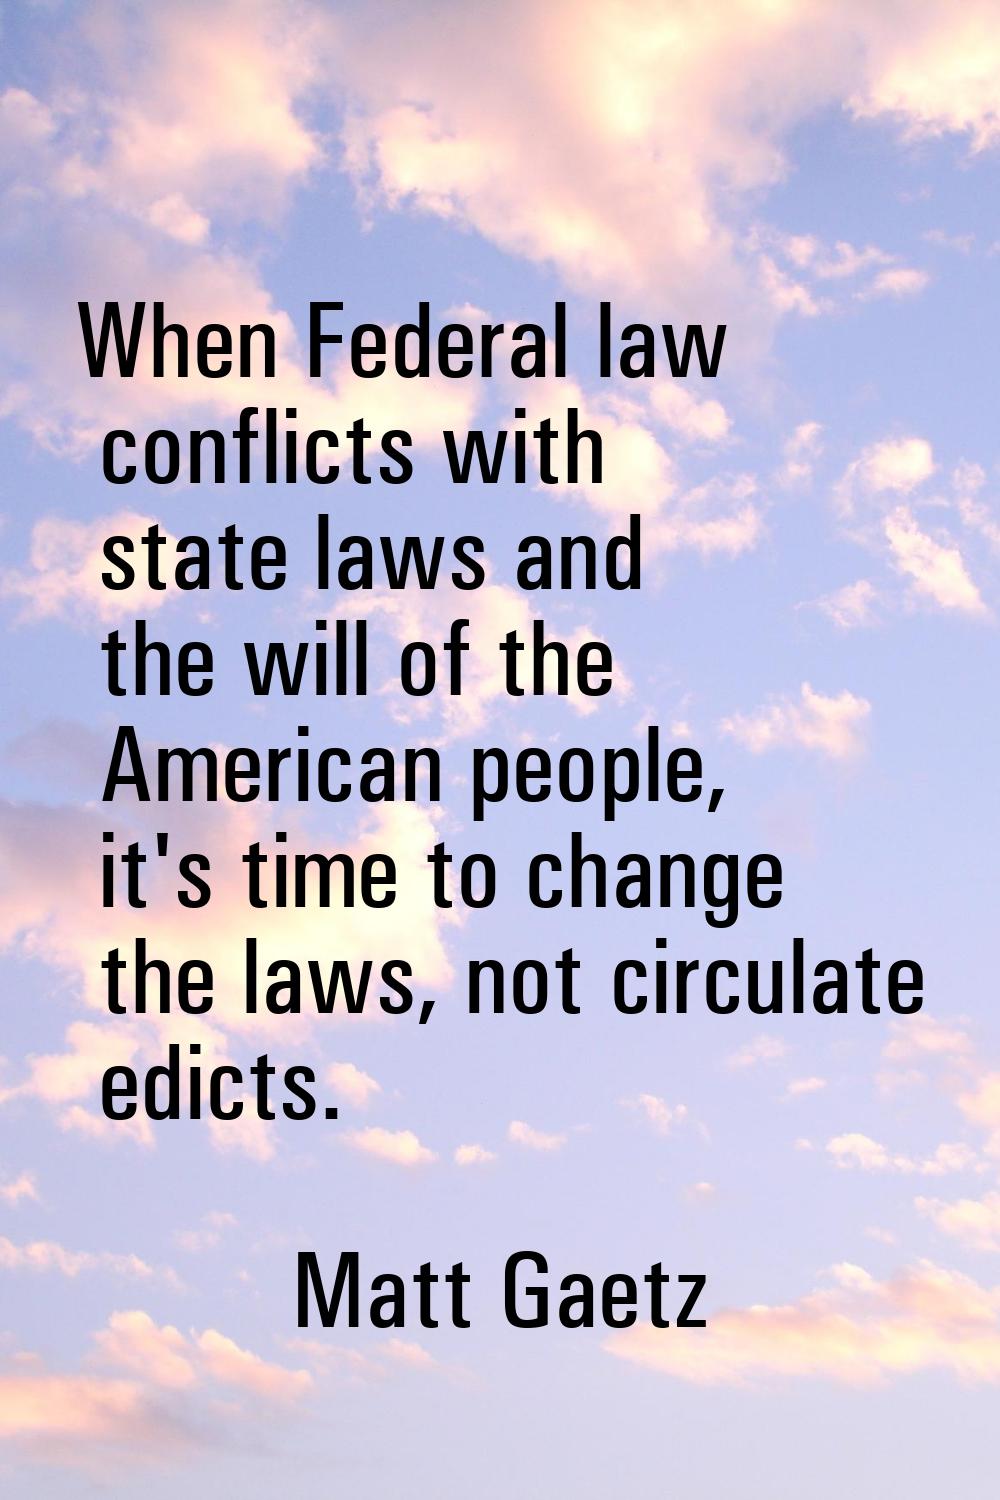 When Federal law conflicts with state laws and the will of the American people, it's time to change